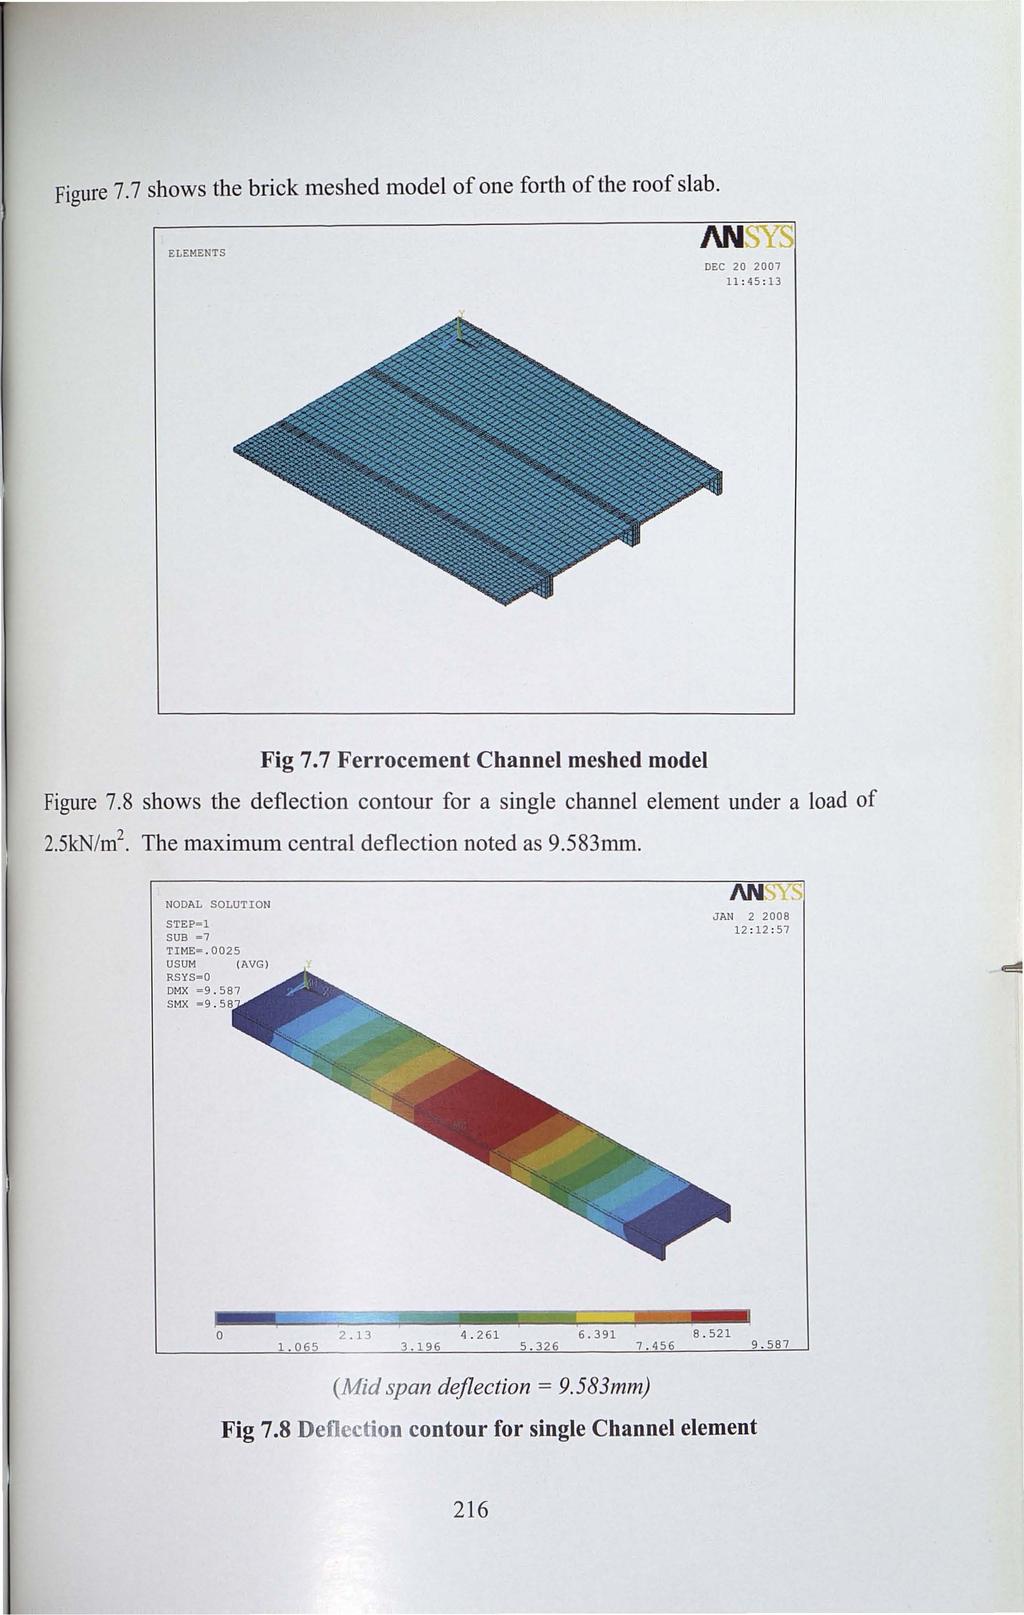 Figure 7.7 shows the brick meshed model ofone forth ofthe roof slab. ELEMENTS J\NSYS DEC 20 2007 1l,45,13 Fig 7.7 Ferrocement Channel meshed model Figure 7.